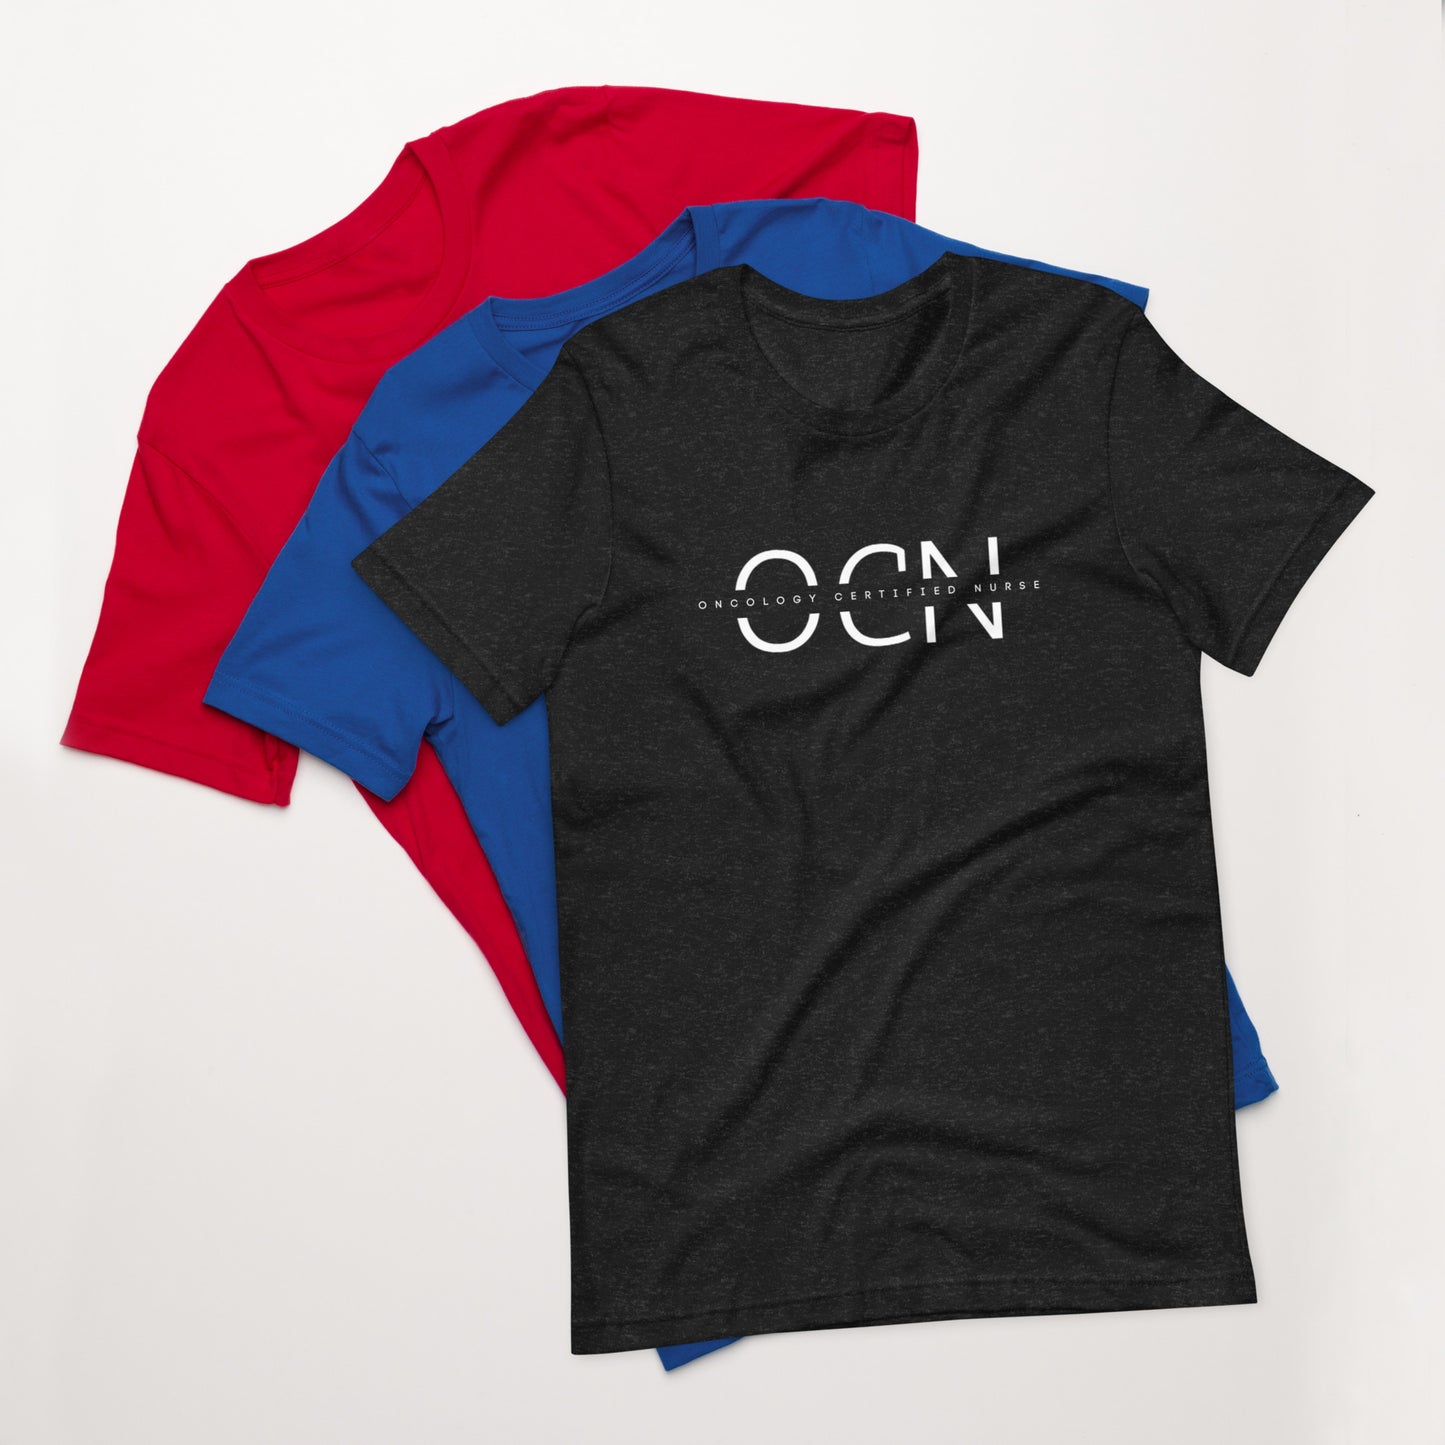 ONC Oncology Certified Nurse t-shirt